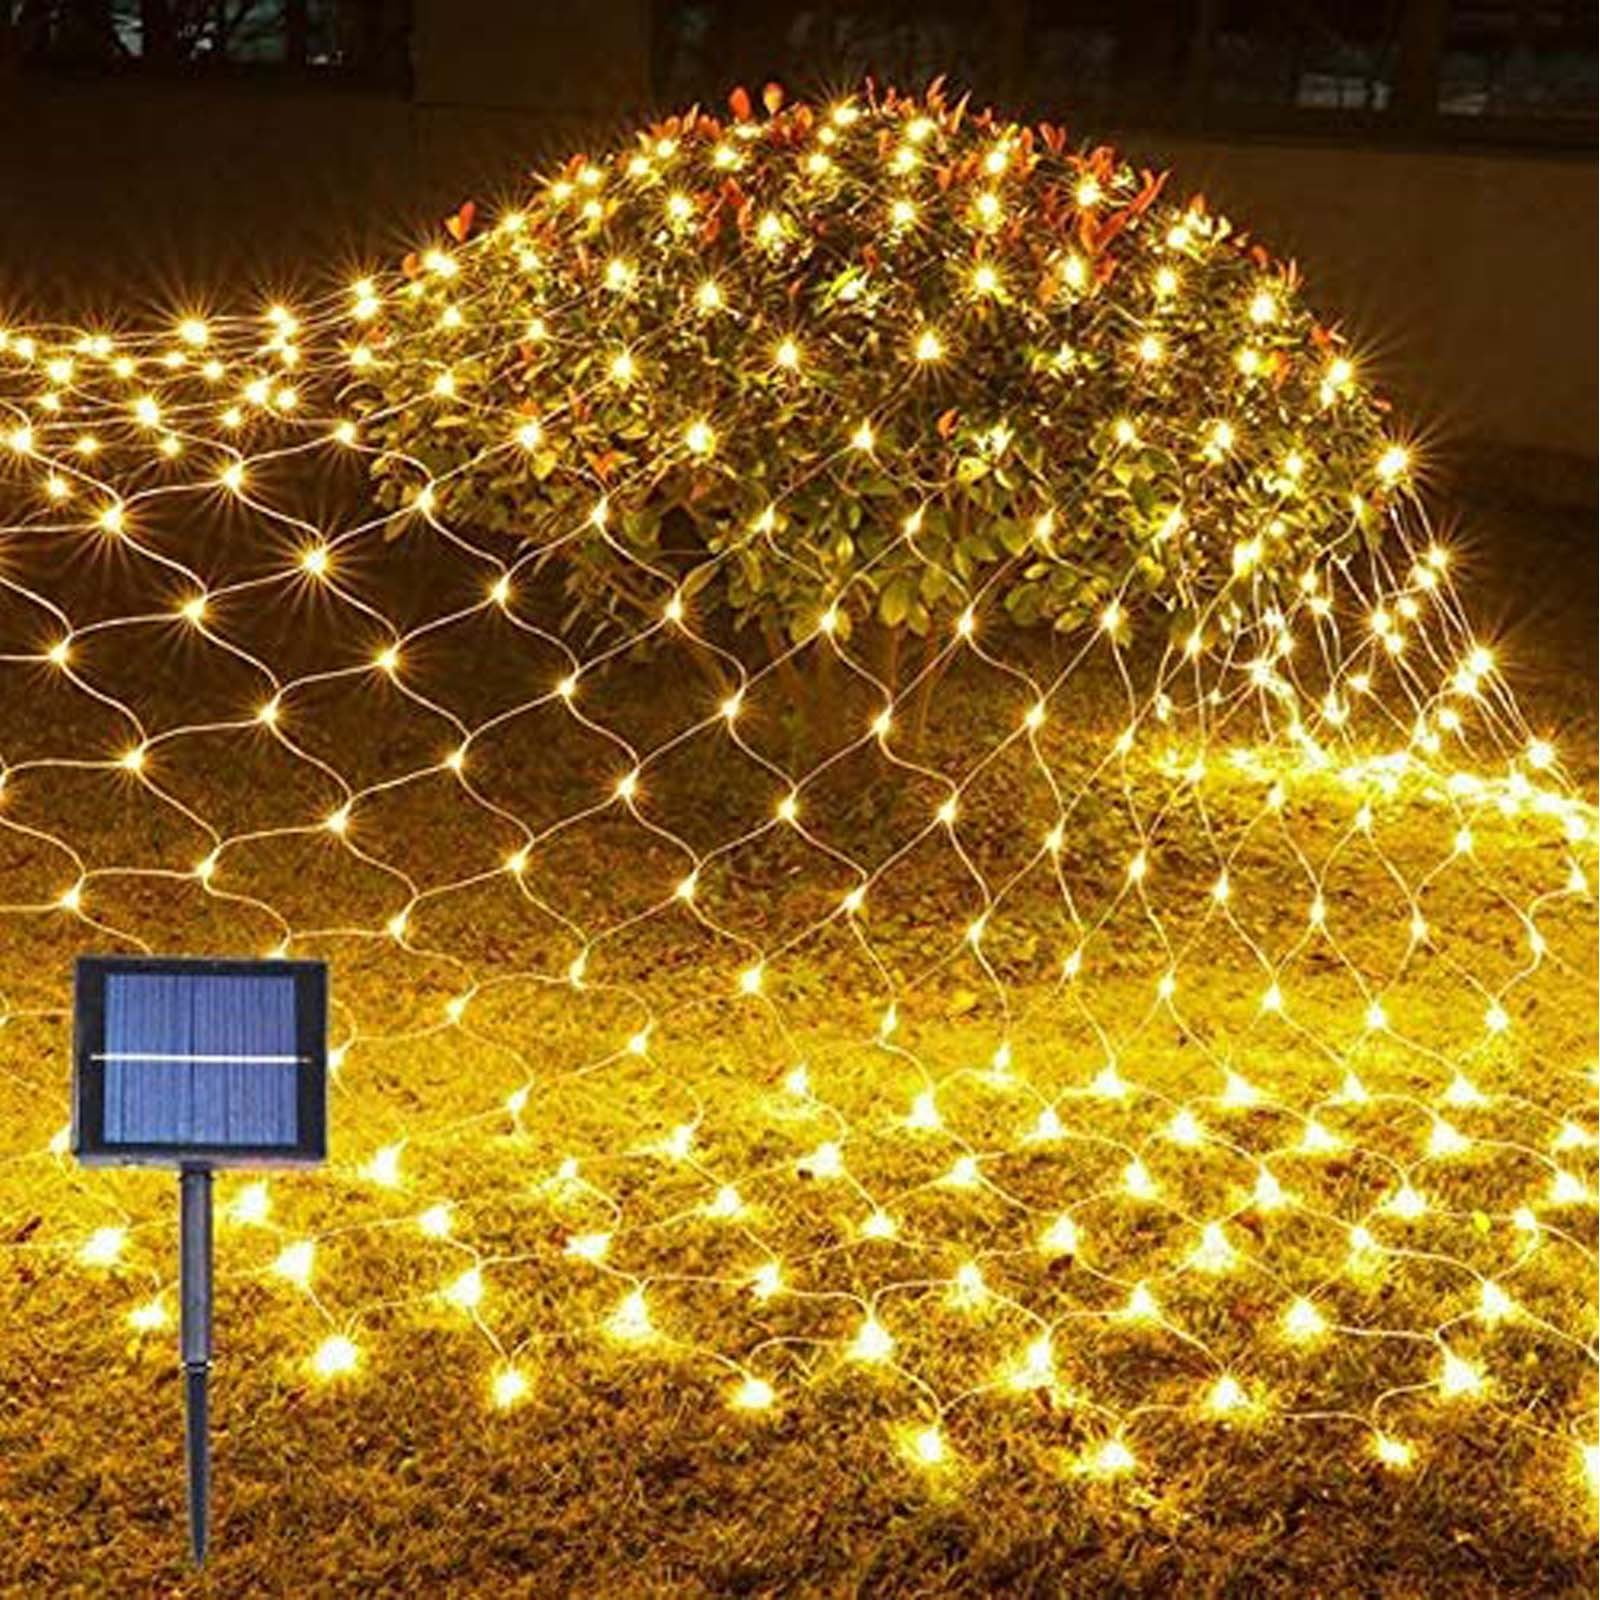 LED Fairy String Net Mesh Curtain Lights Xmas Waterproof Outdoor Home Party Deco 